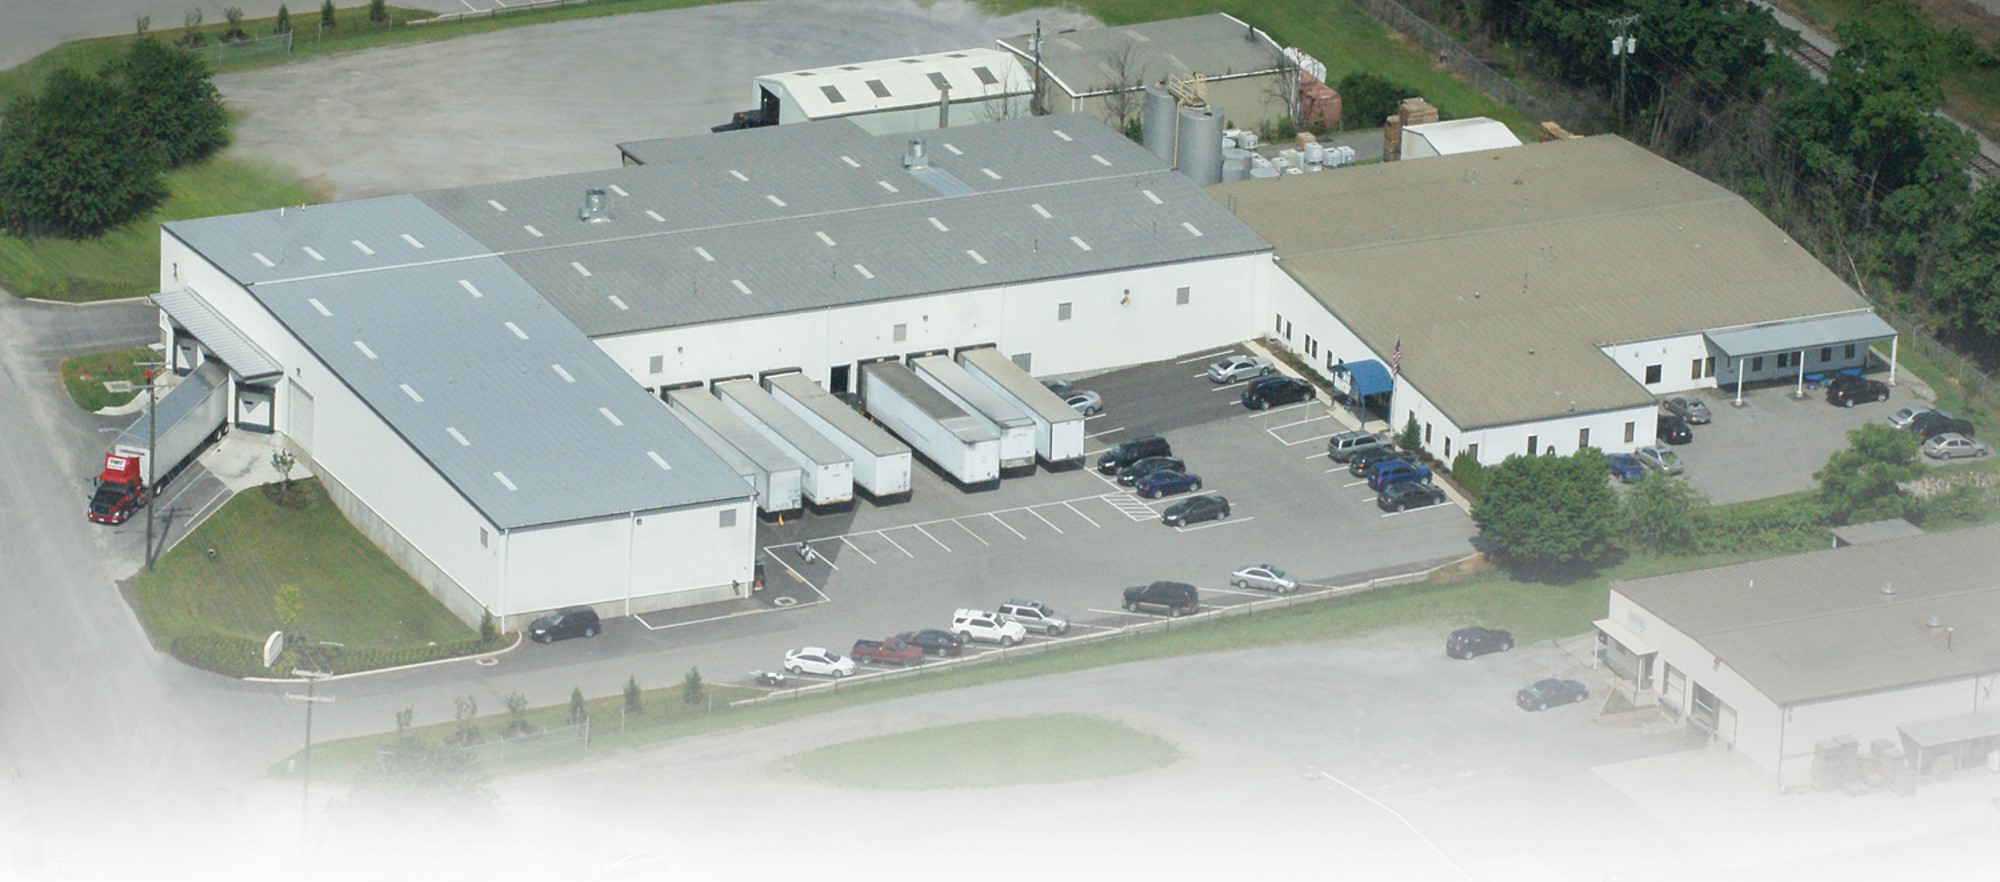 An aerial view of a large industrial building complex with a parking lot, several docked delivery trucks, and adjacent smaller structures.